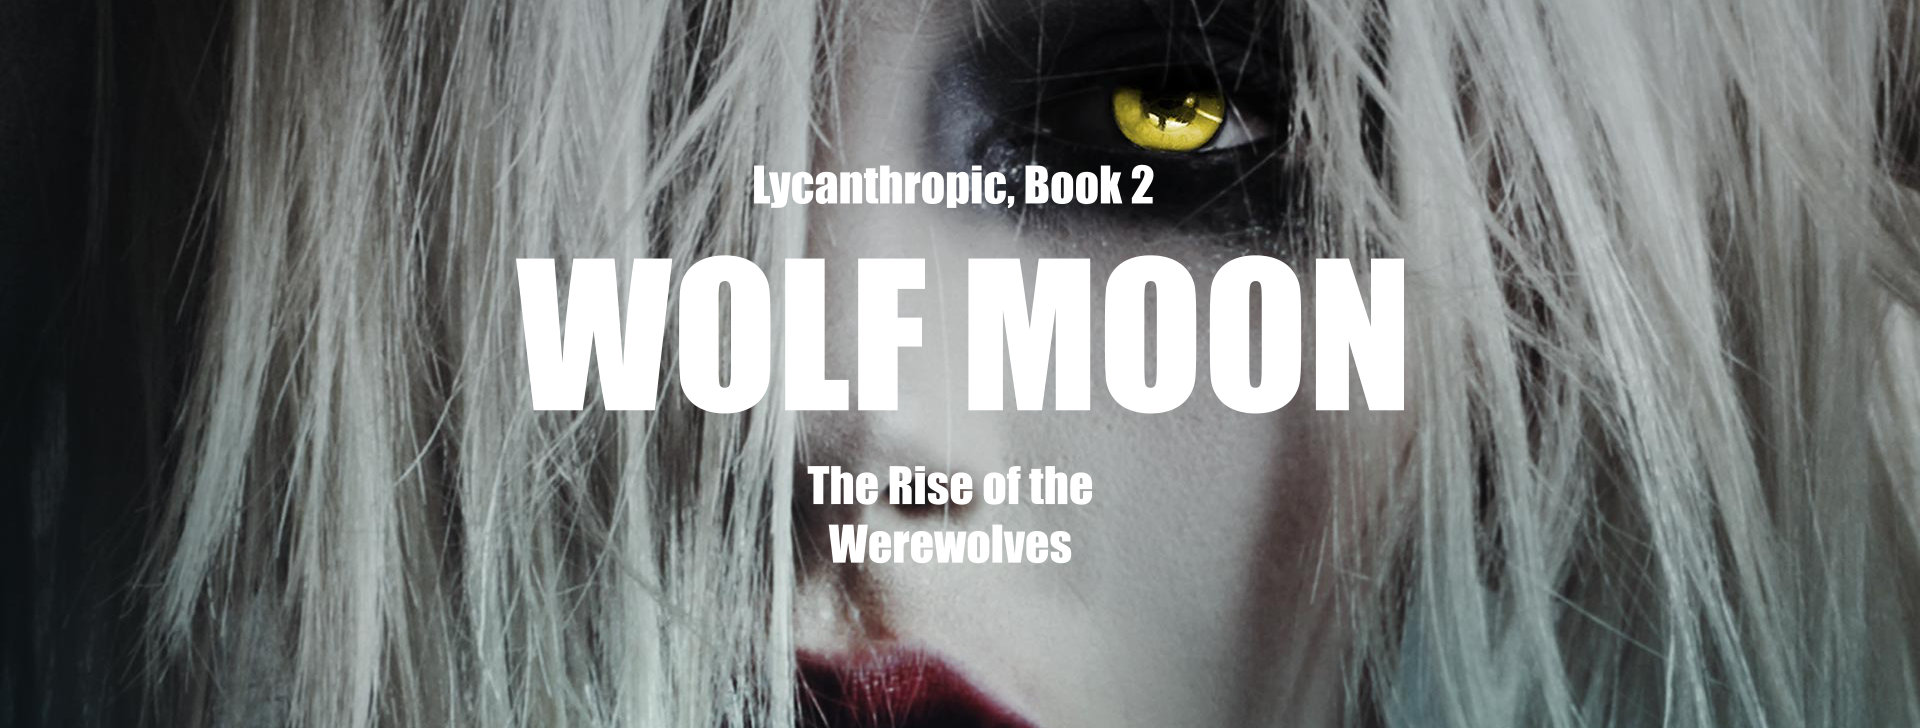 The Rise of the Werewolves